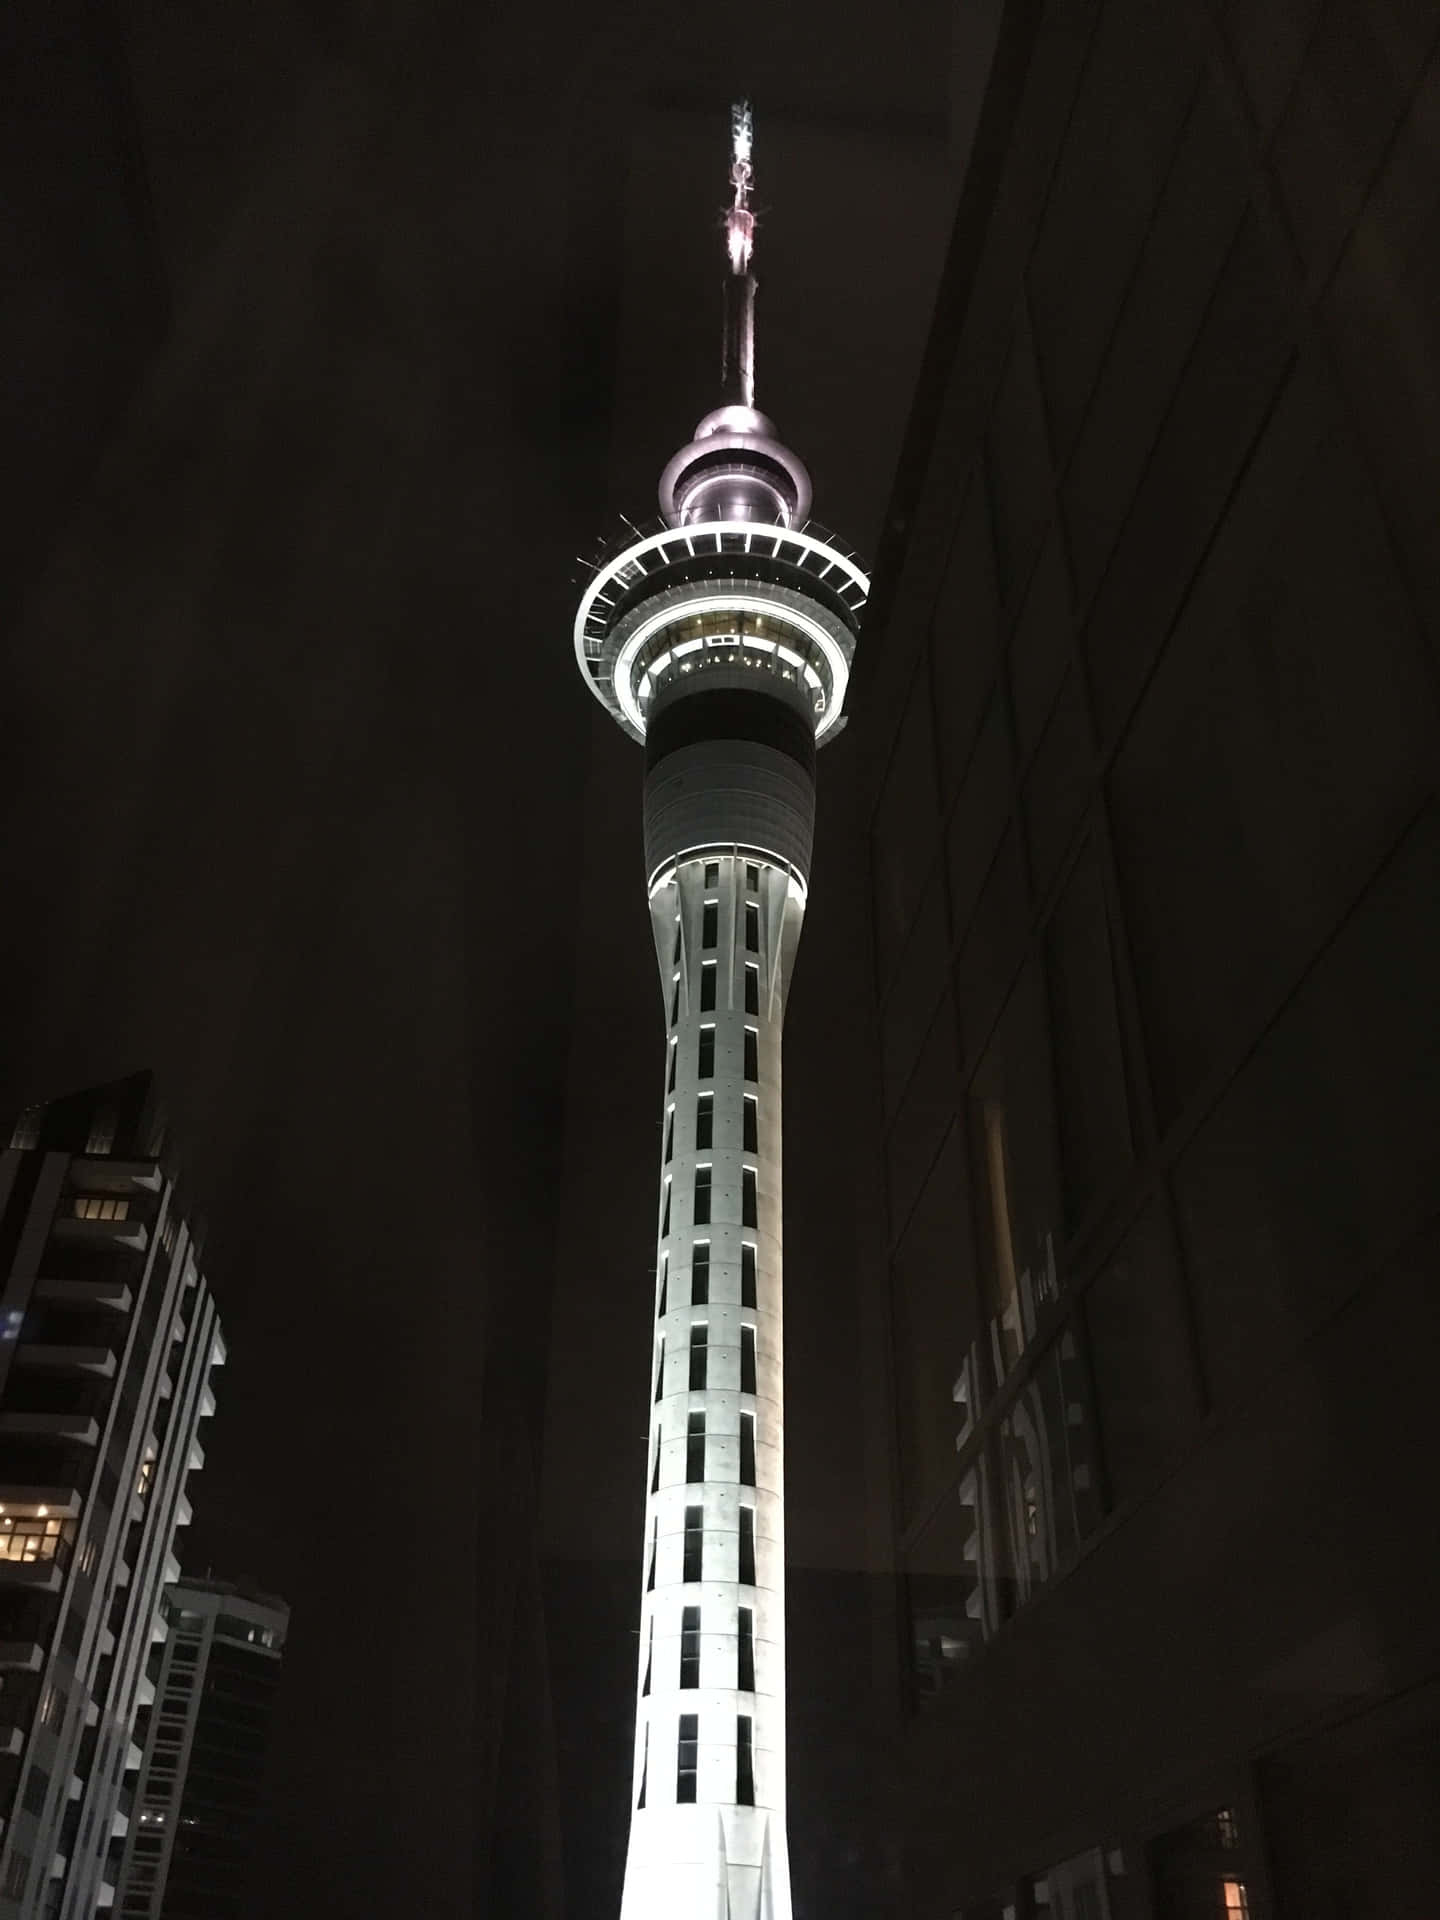 Download Sky Tower Auckland Night View Wallpaper | Wallpapers.com